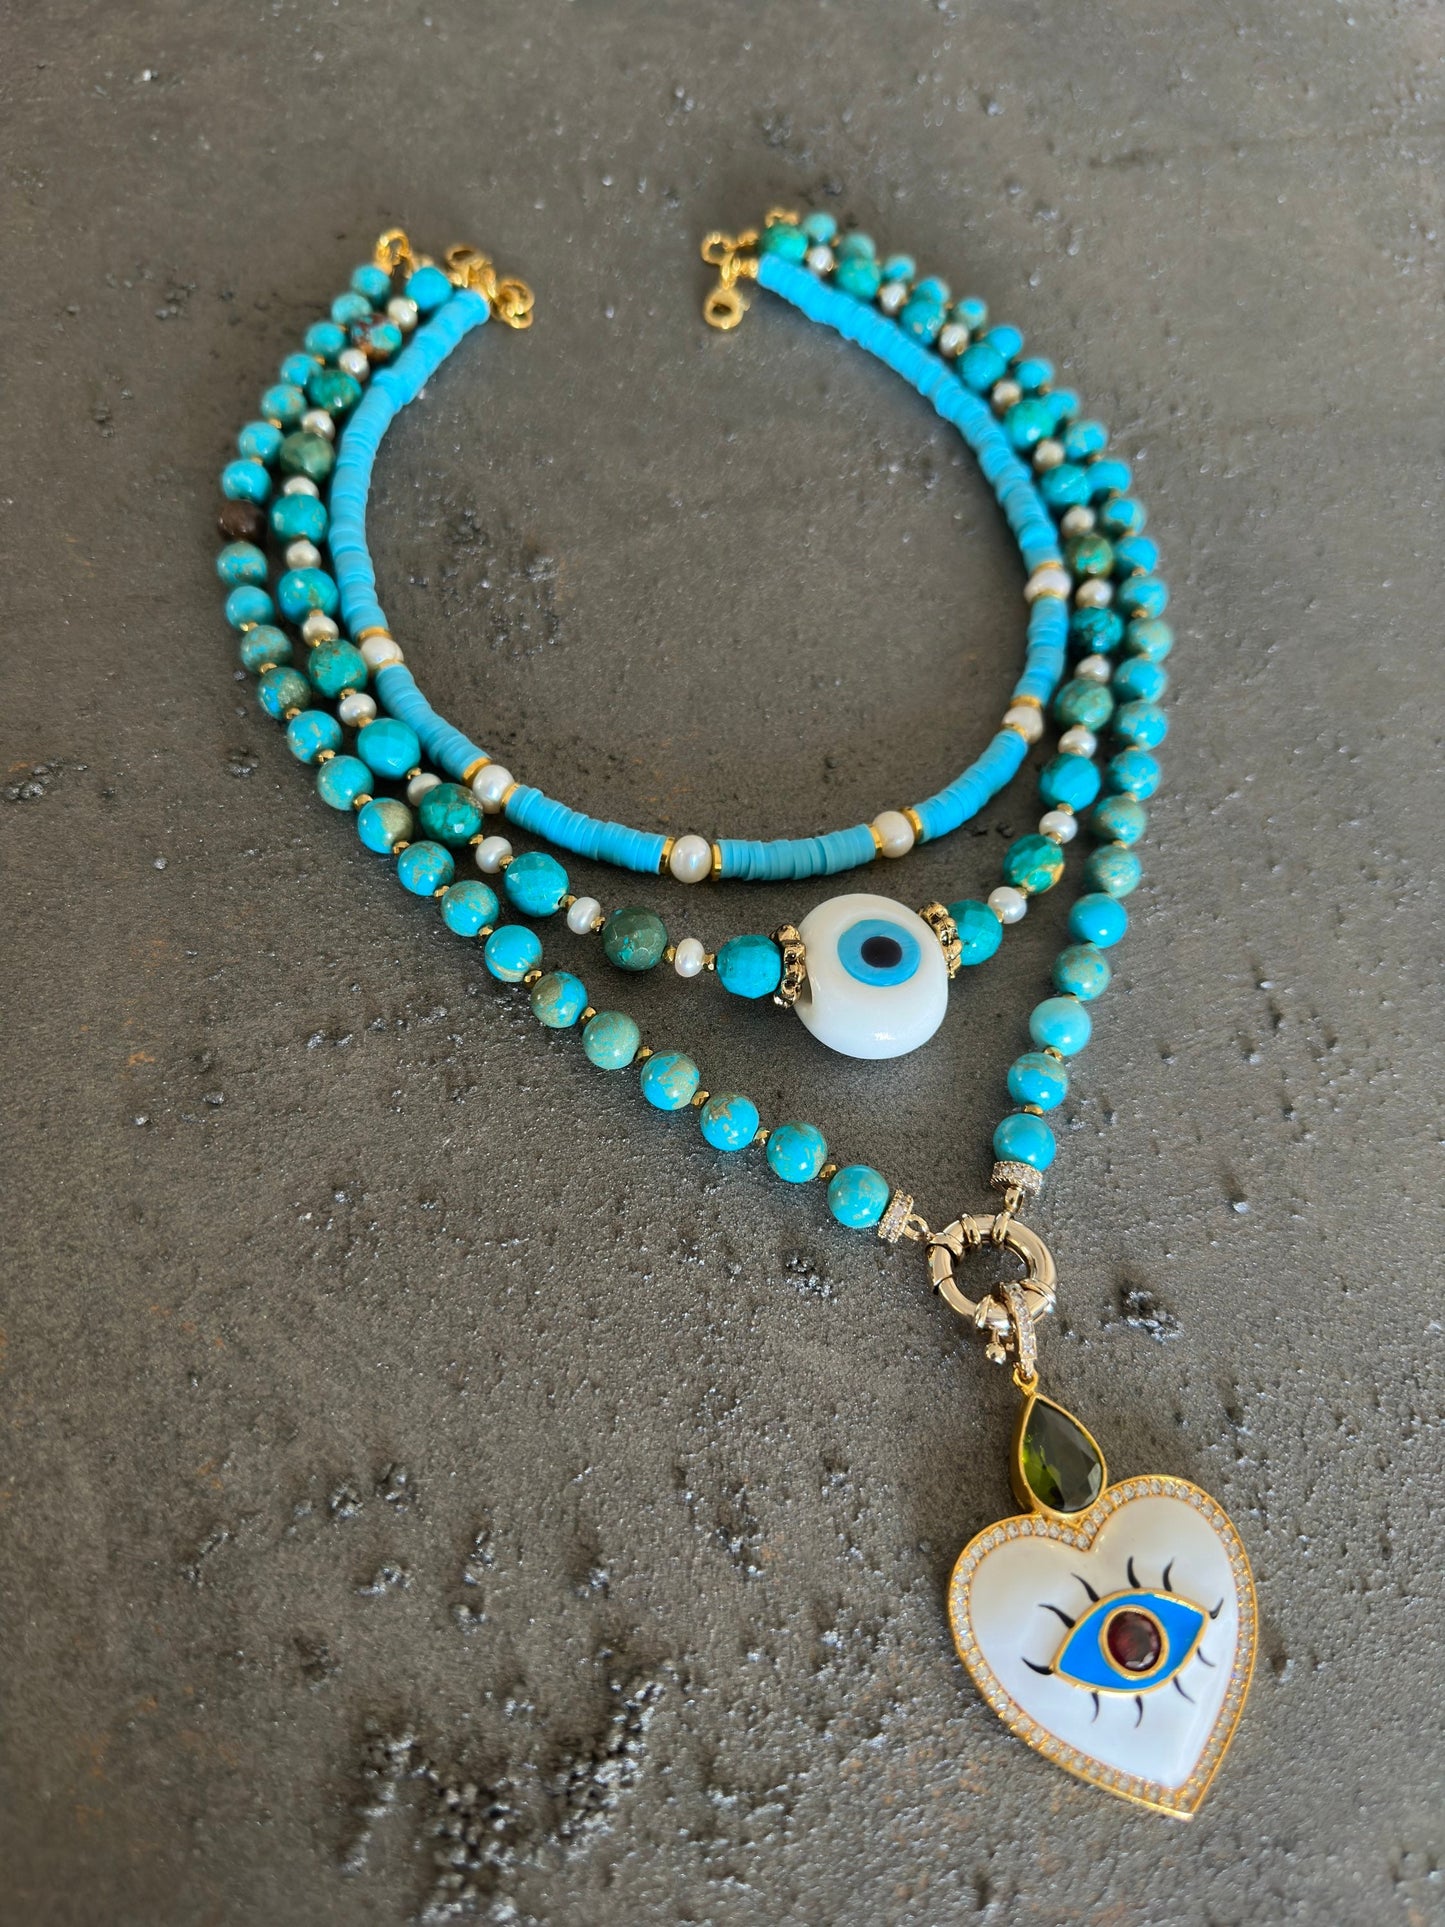 Summer Necklace, Fimo Bead Necklace, Evil Eye Pendant Jewelry for Her, Multistrand Layered Necklace for Gifts